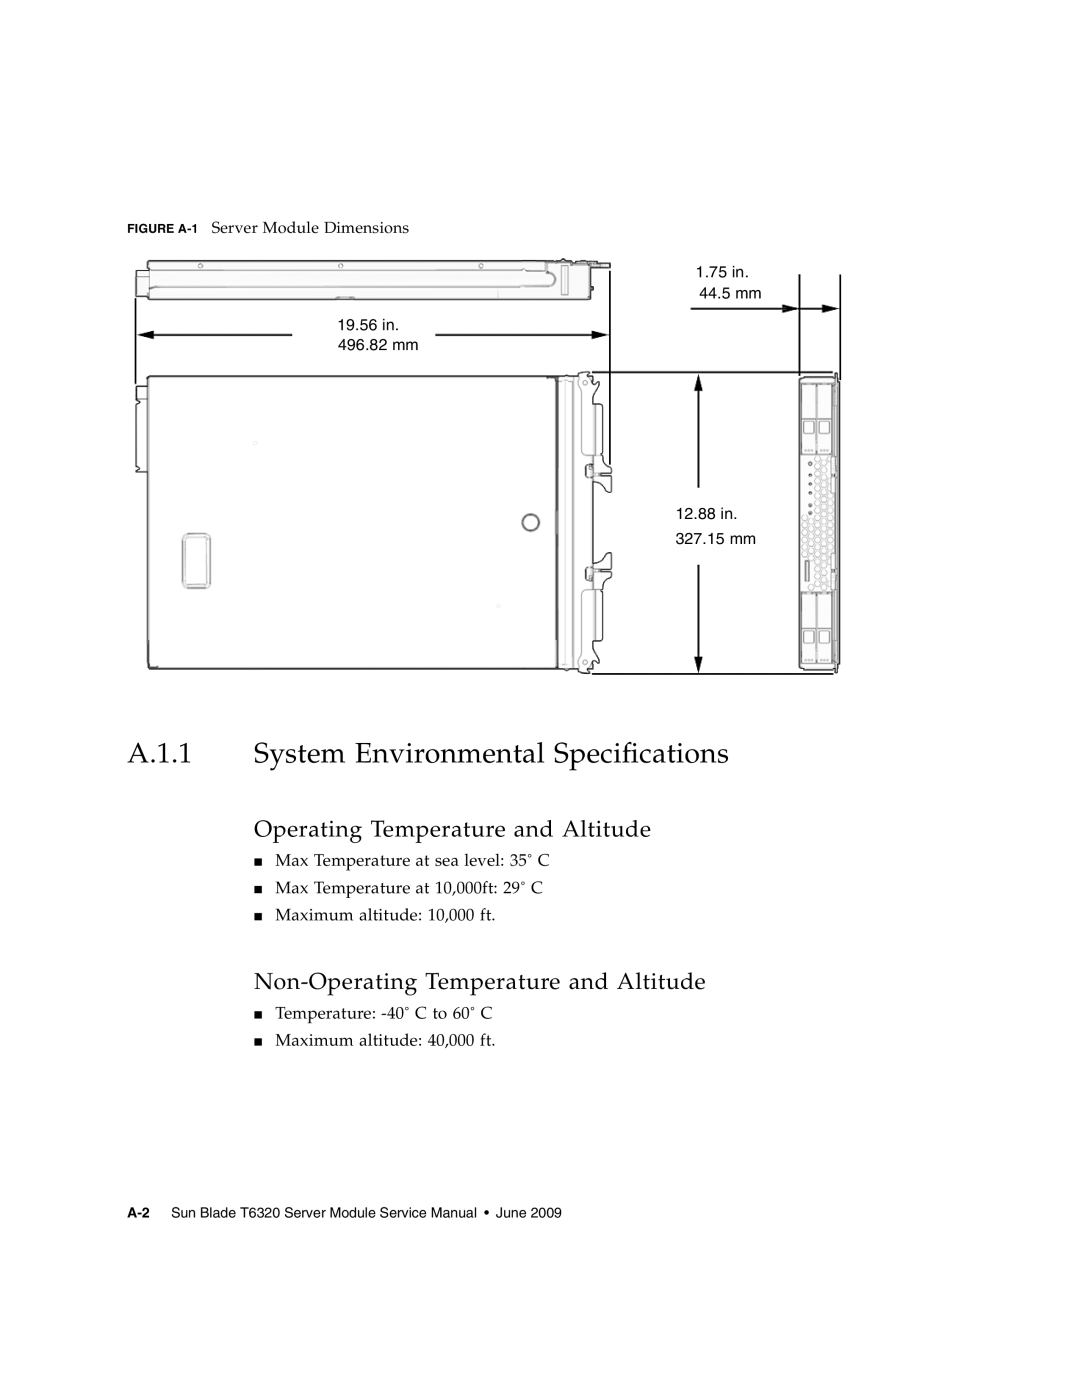 Sun Microsystems T6320 service manual A.1.1 System Environmental Specifications, Operating Temperature and Altitude 